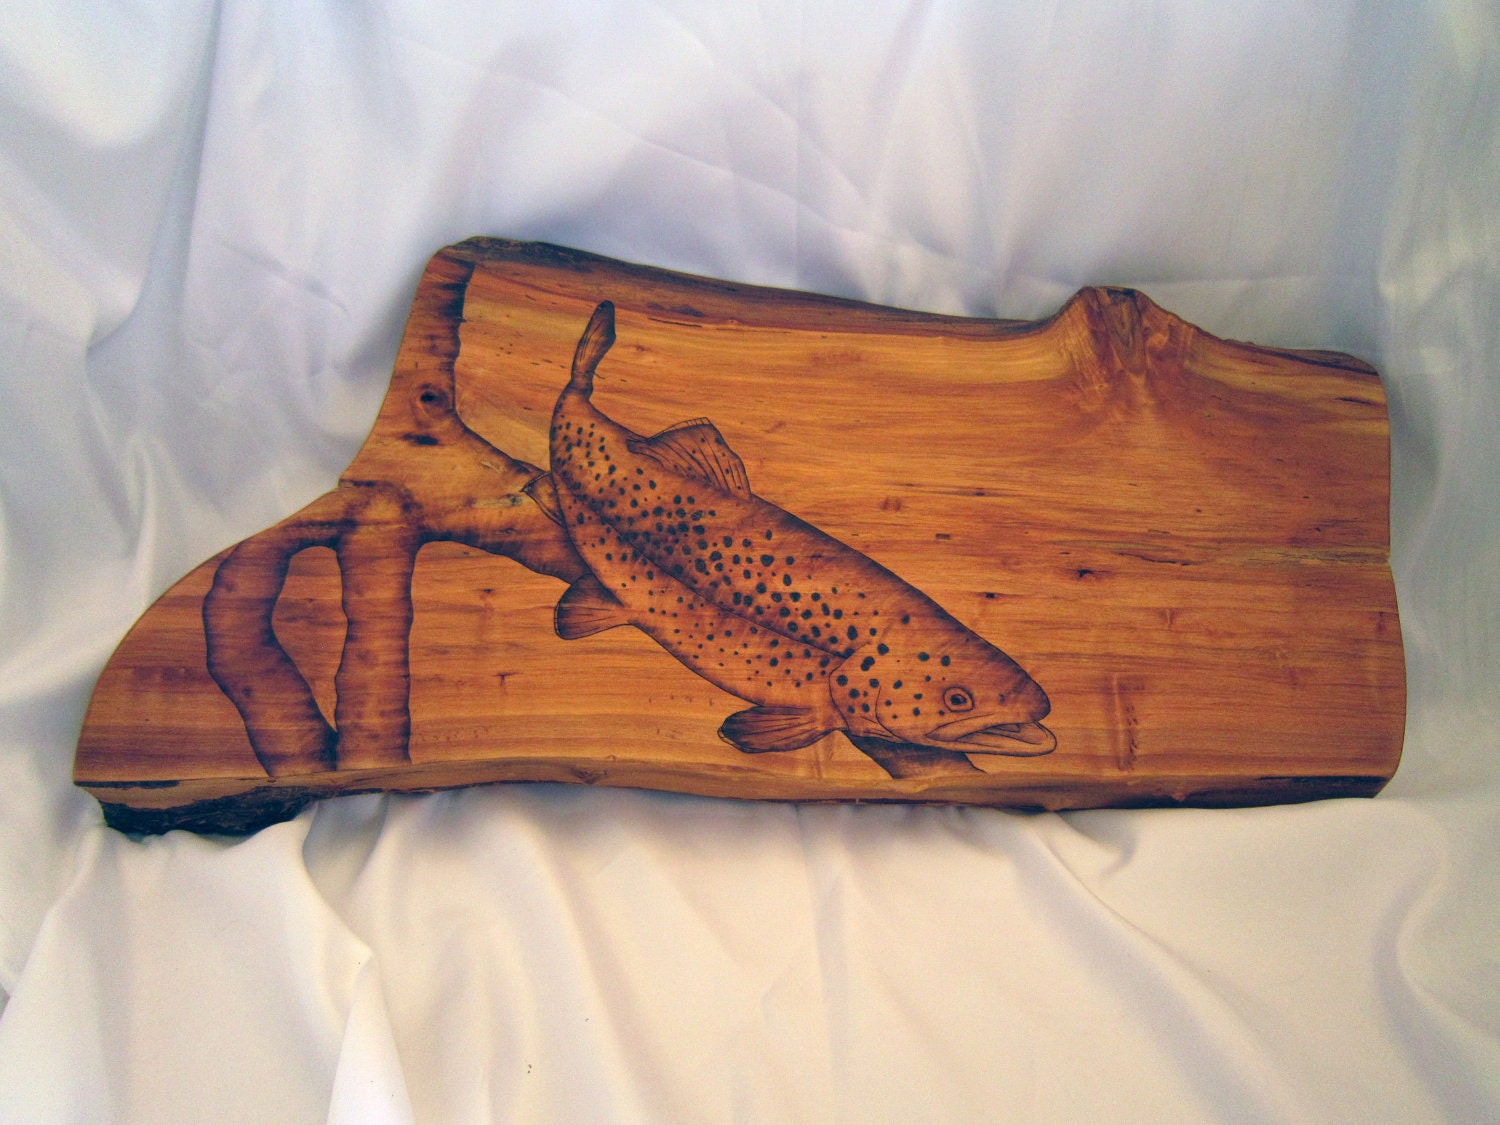 trout wall art - trout fishing nautical wall decor - brown trout pyrography - rustic wall hanging